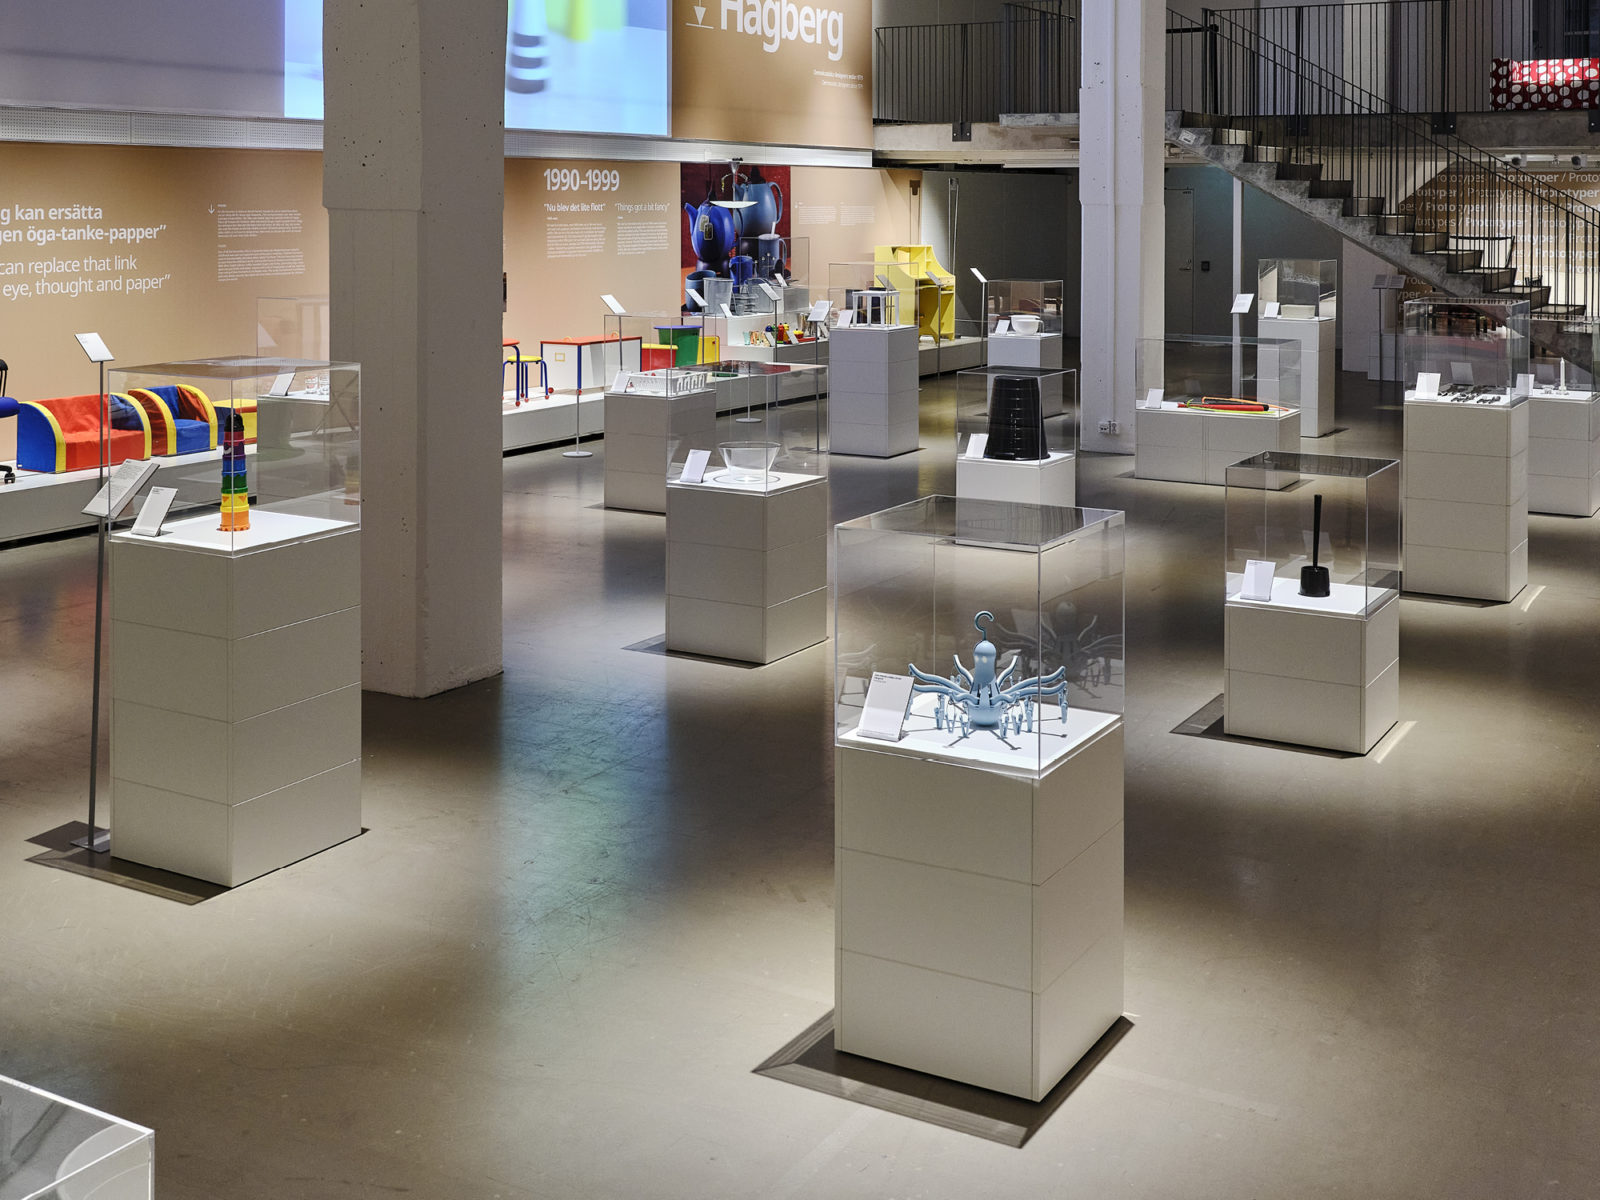 Exhibition hall where objects are displayed in glass cabinets on white cubes, and images are projected onto walls.